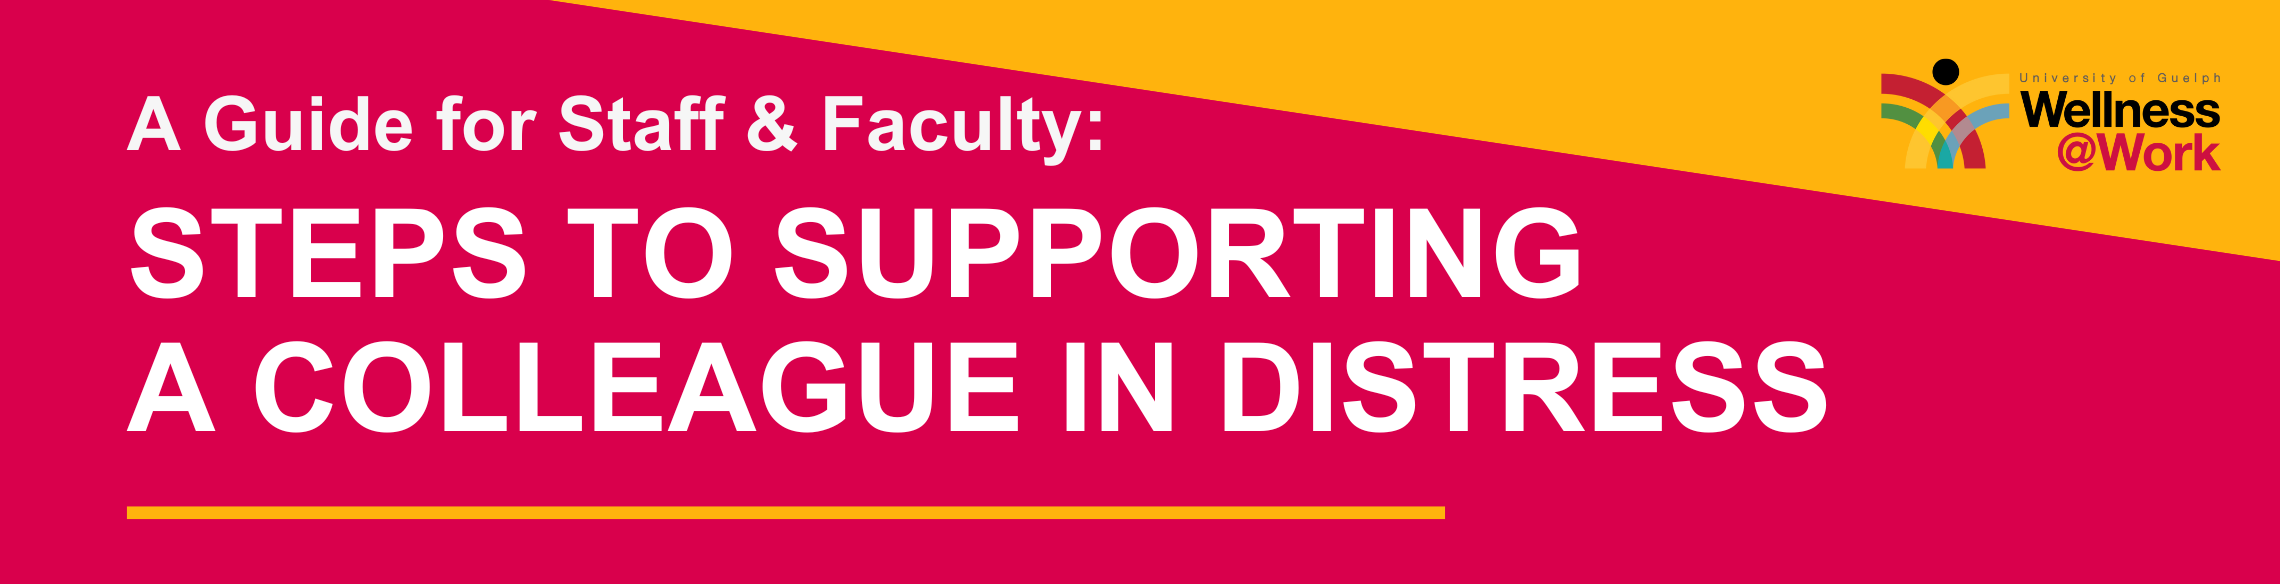 red background with yellow stripe across right corner with white text "A guide for staff & faculty: Steps to supporting a colleague in distress"